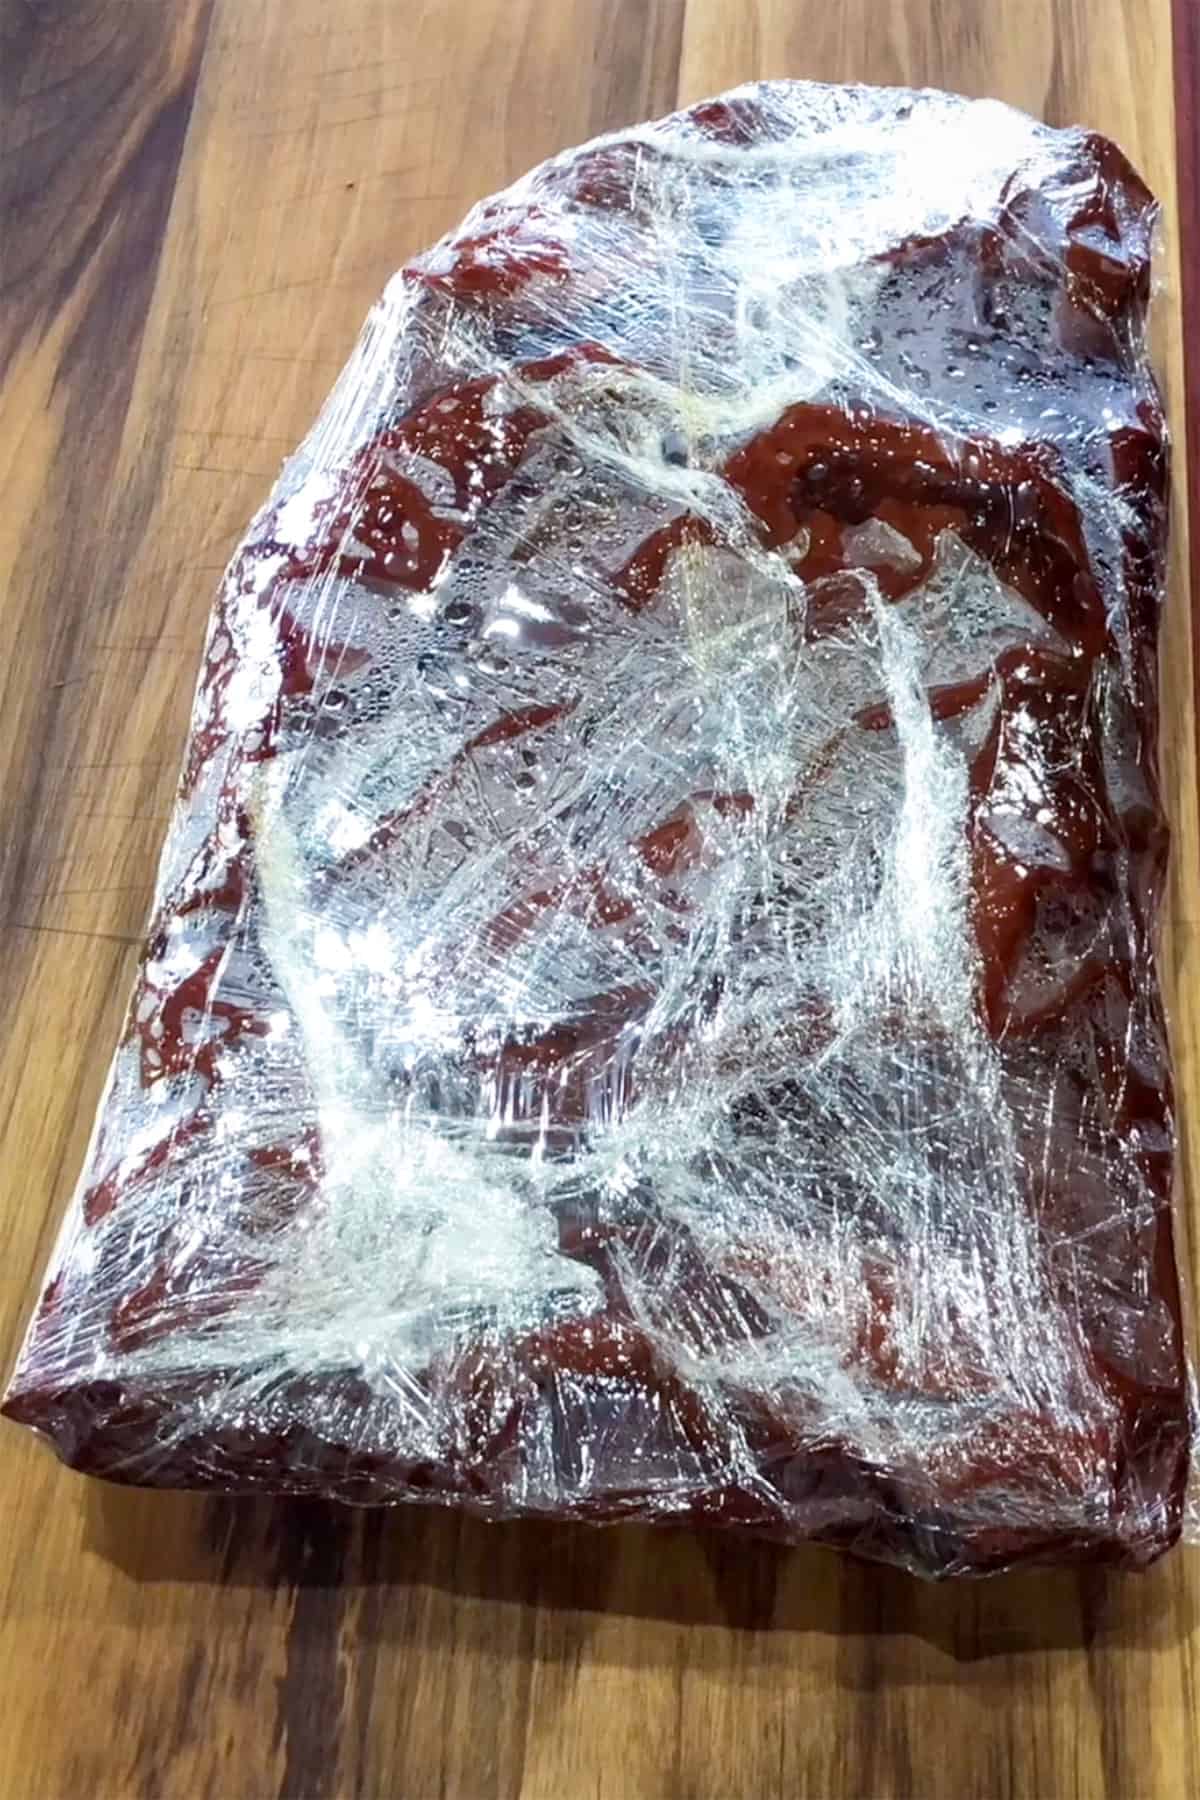 Brisket wrapped in butcher paper and plastic wrap. 